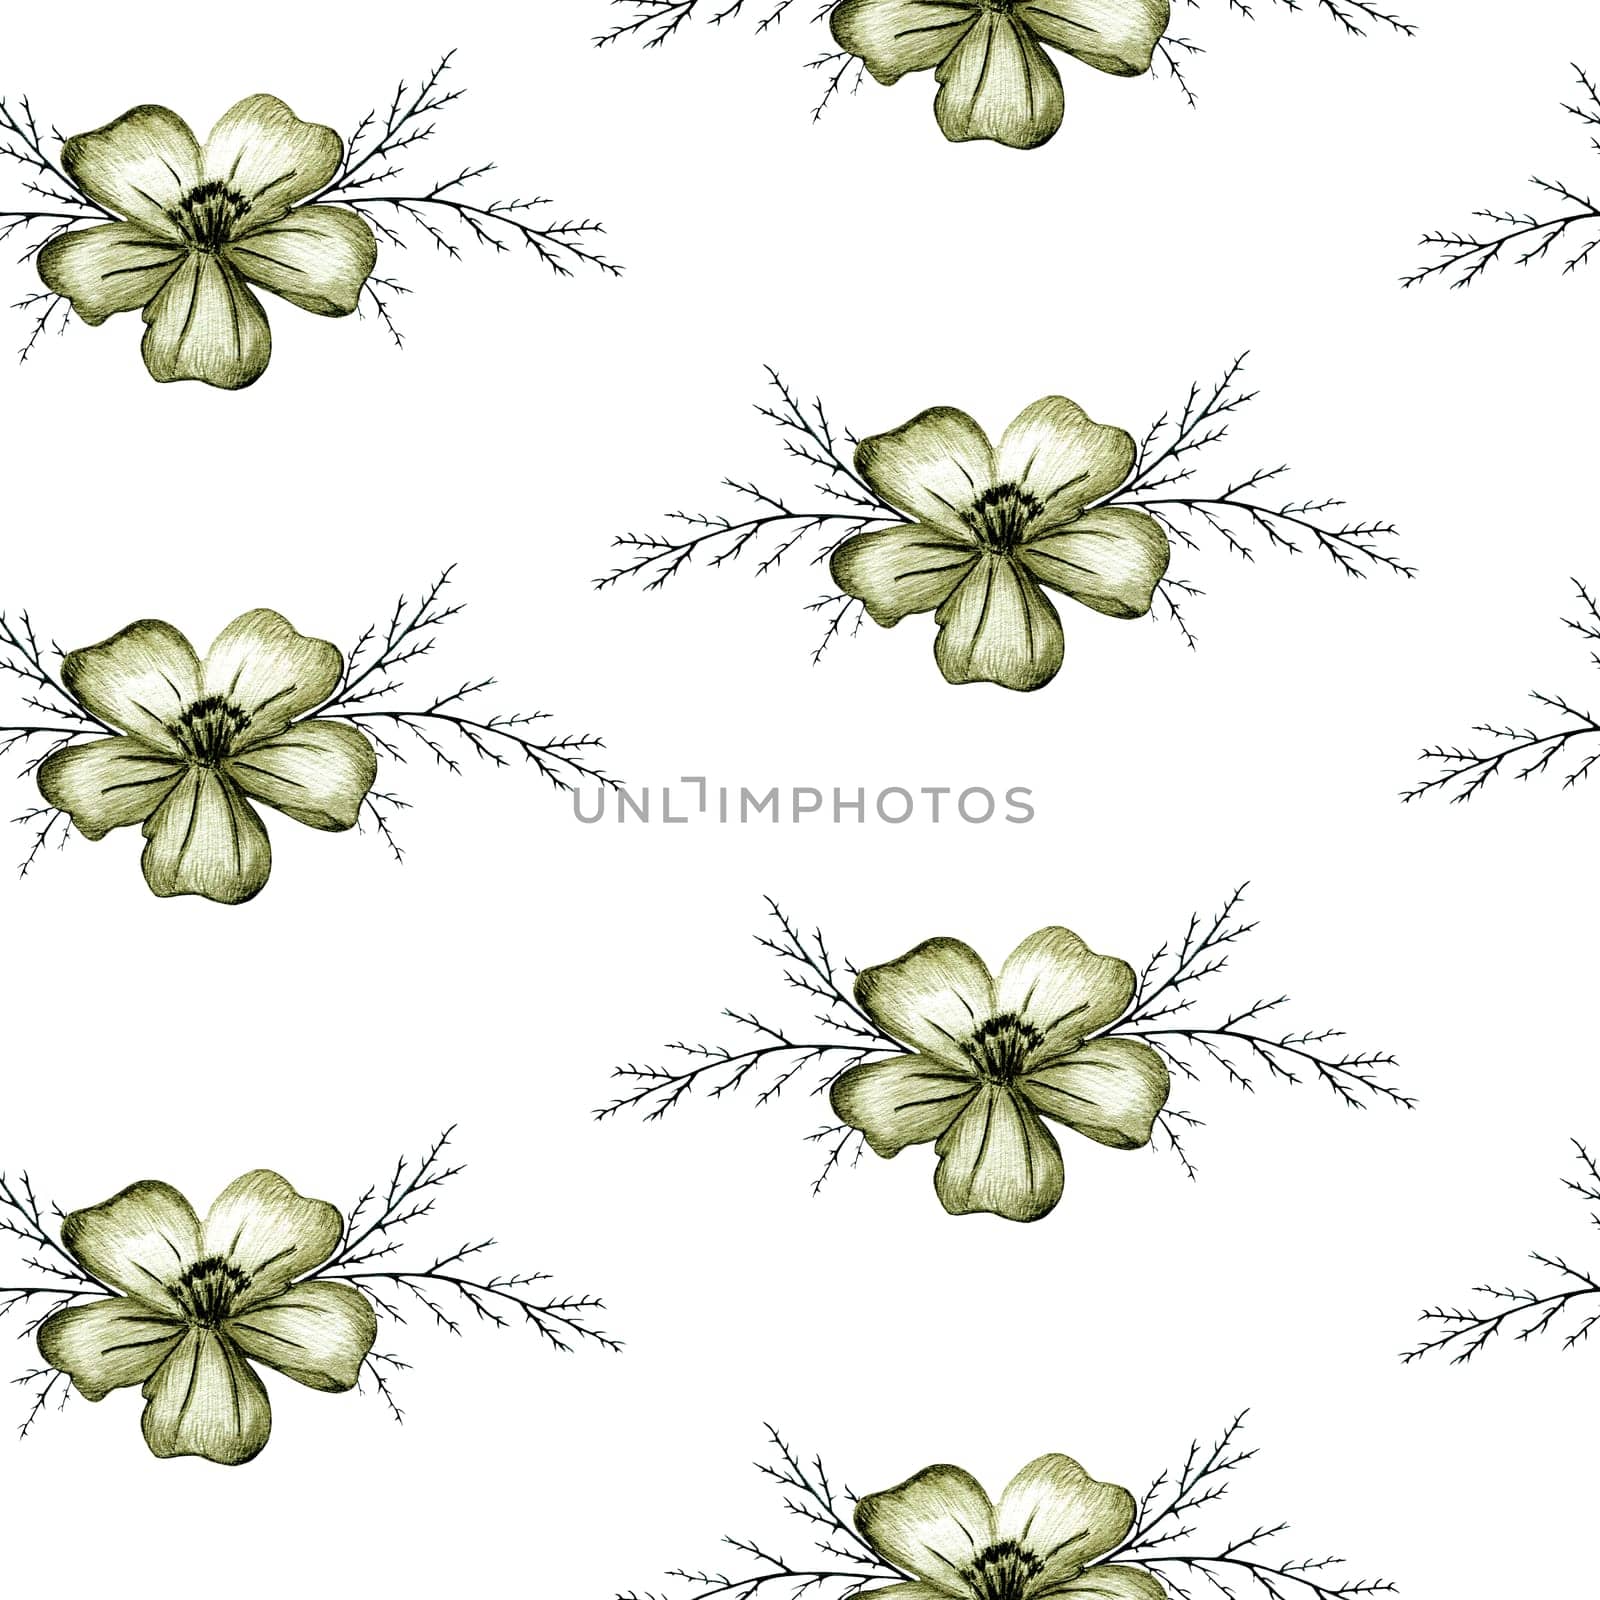 Seamless Pattern with Hand-Drawn Yellow Flower. White Background with Thin-leaved Yellow Marigolds for Print, Design, Holiday, Wedding and Birthday Card.